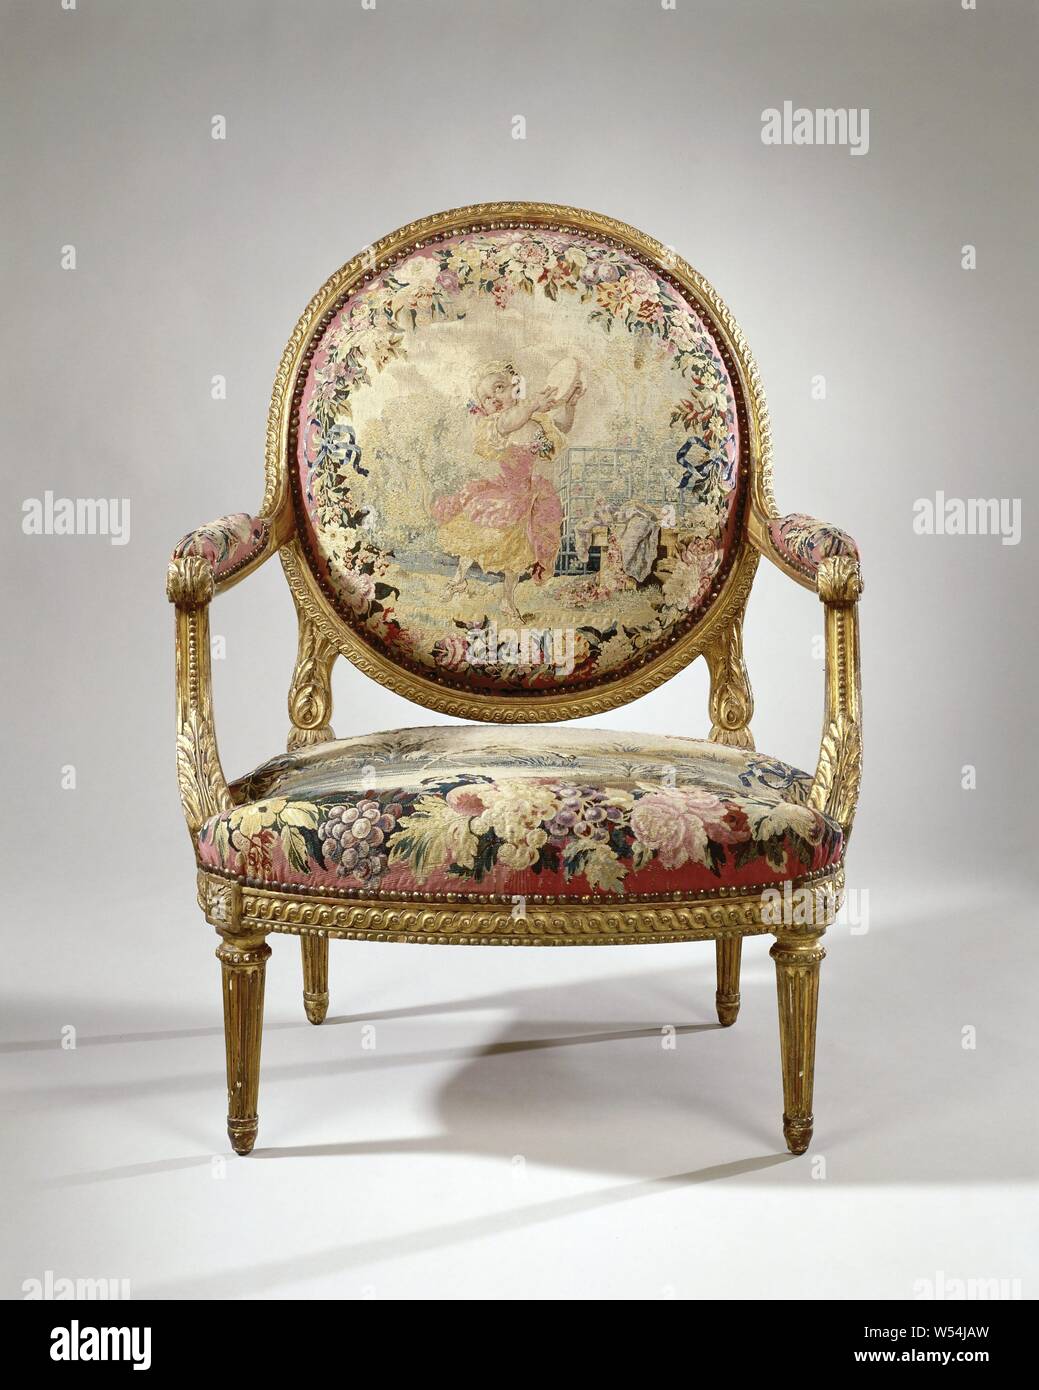 Armchair upholstered in tapestry with a dancing girl (petite danseuse) (back) and the heron's fable (seat), Armchair made of gilded beech wood, resting on conically shaped legs. The armchair belongs to an ameublement. On the pink curved seat frame and the covered oval back window, on a pink fond, representations are made within flower wreaths (tapestry de Beauvais)., Manufacture Royale des Gobelins, France, c. 1755 - c. 1765 and/or c. 1935, walnut (hardwood), gilding (material), ketting, inslag, gilding, h 101 cm × w 78 cm × d 75 cm h 43 cm × d 53 cm Stock Photo